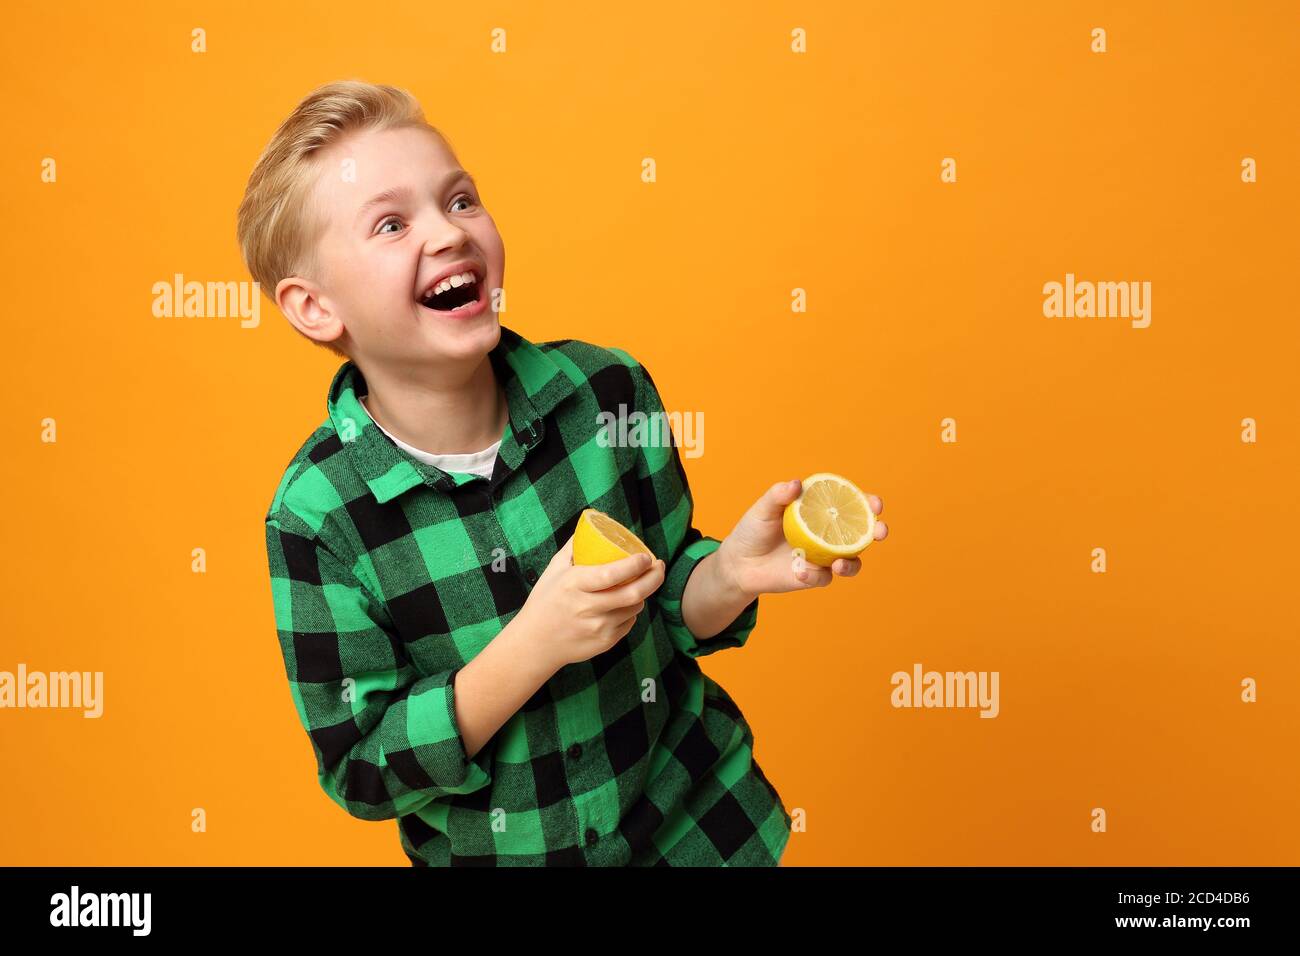 Sour face, cheerful facial expression. The boy bites a lemon. Happy child, facial expressions, energy and fun. Expression and joy of the child. The bo Stock Photo